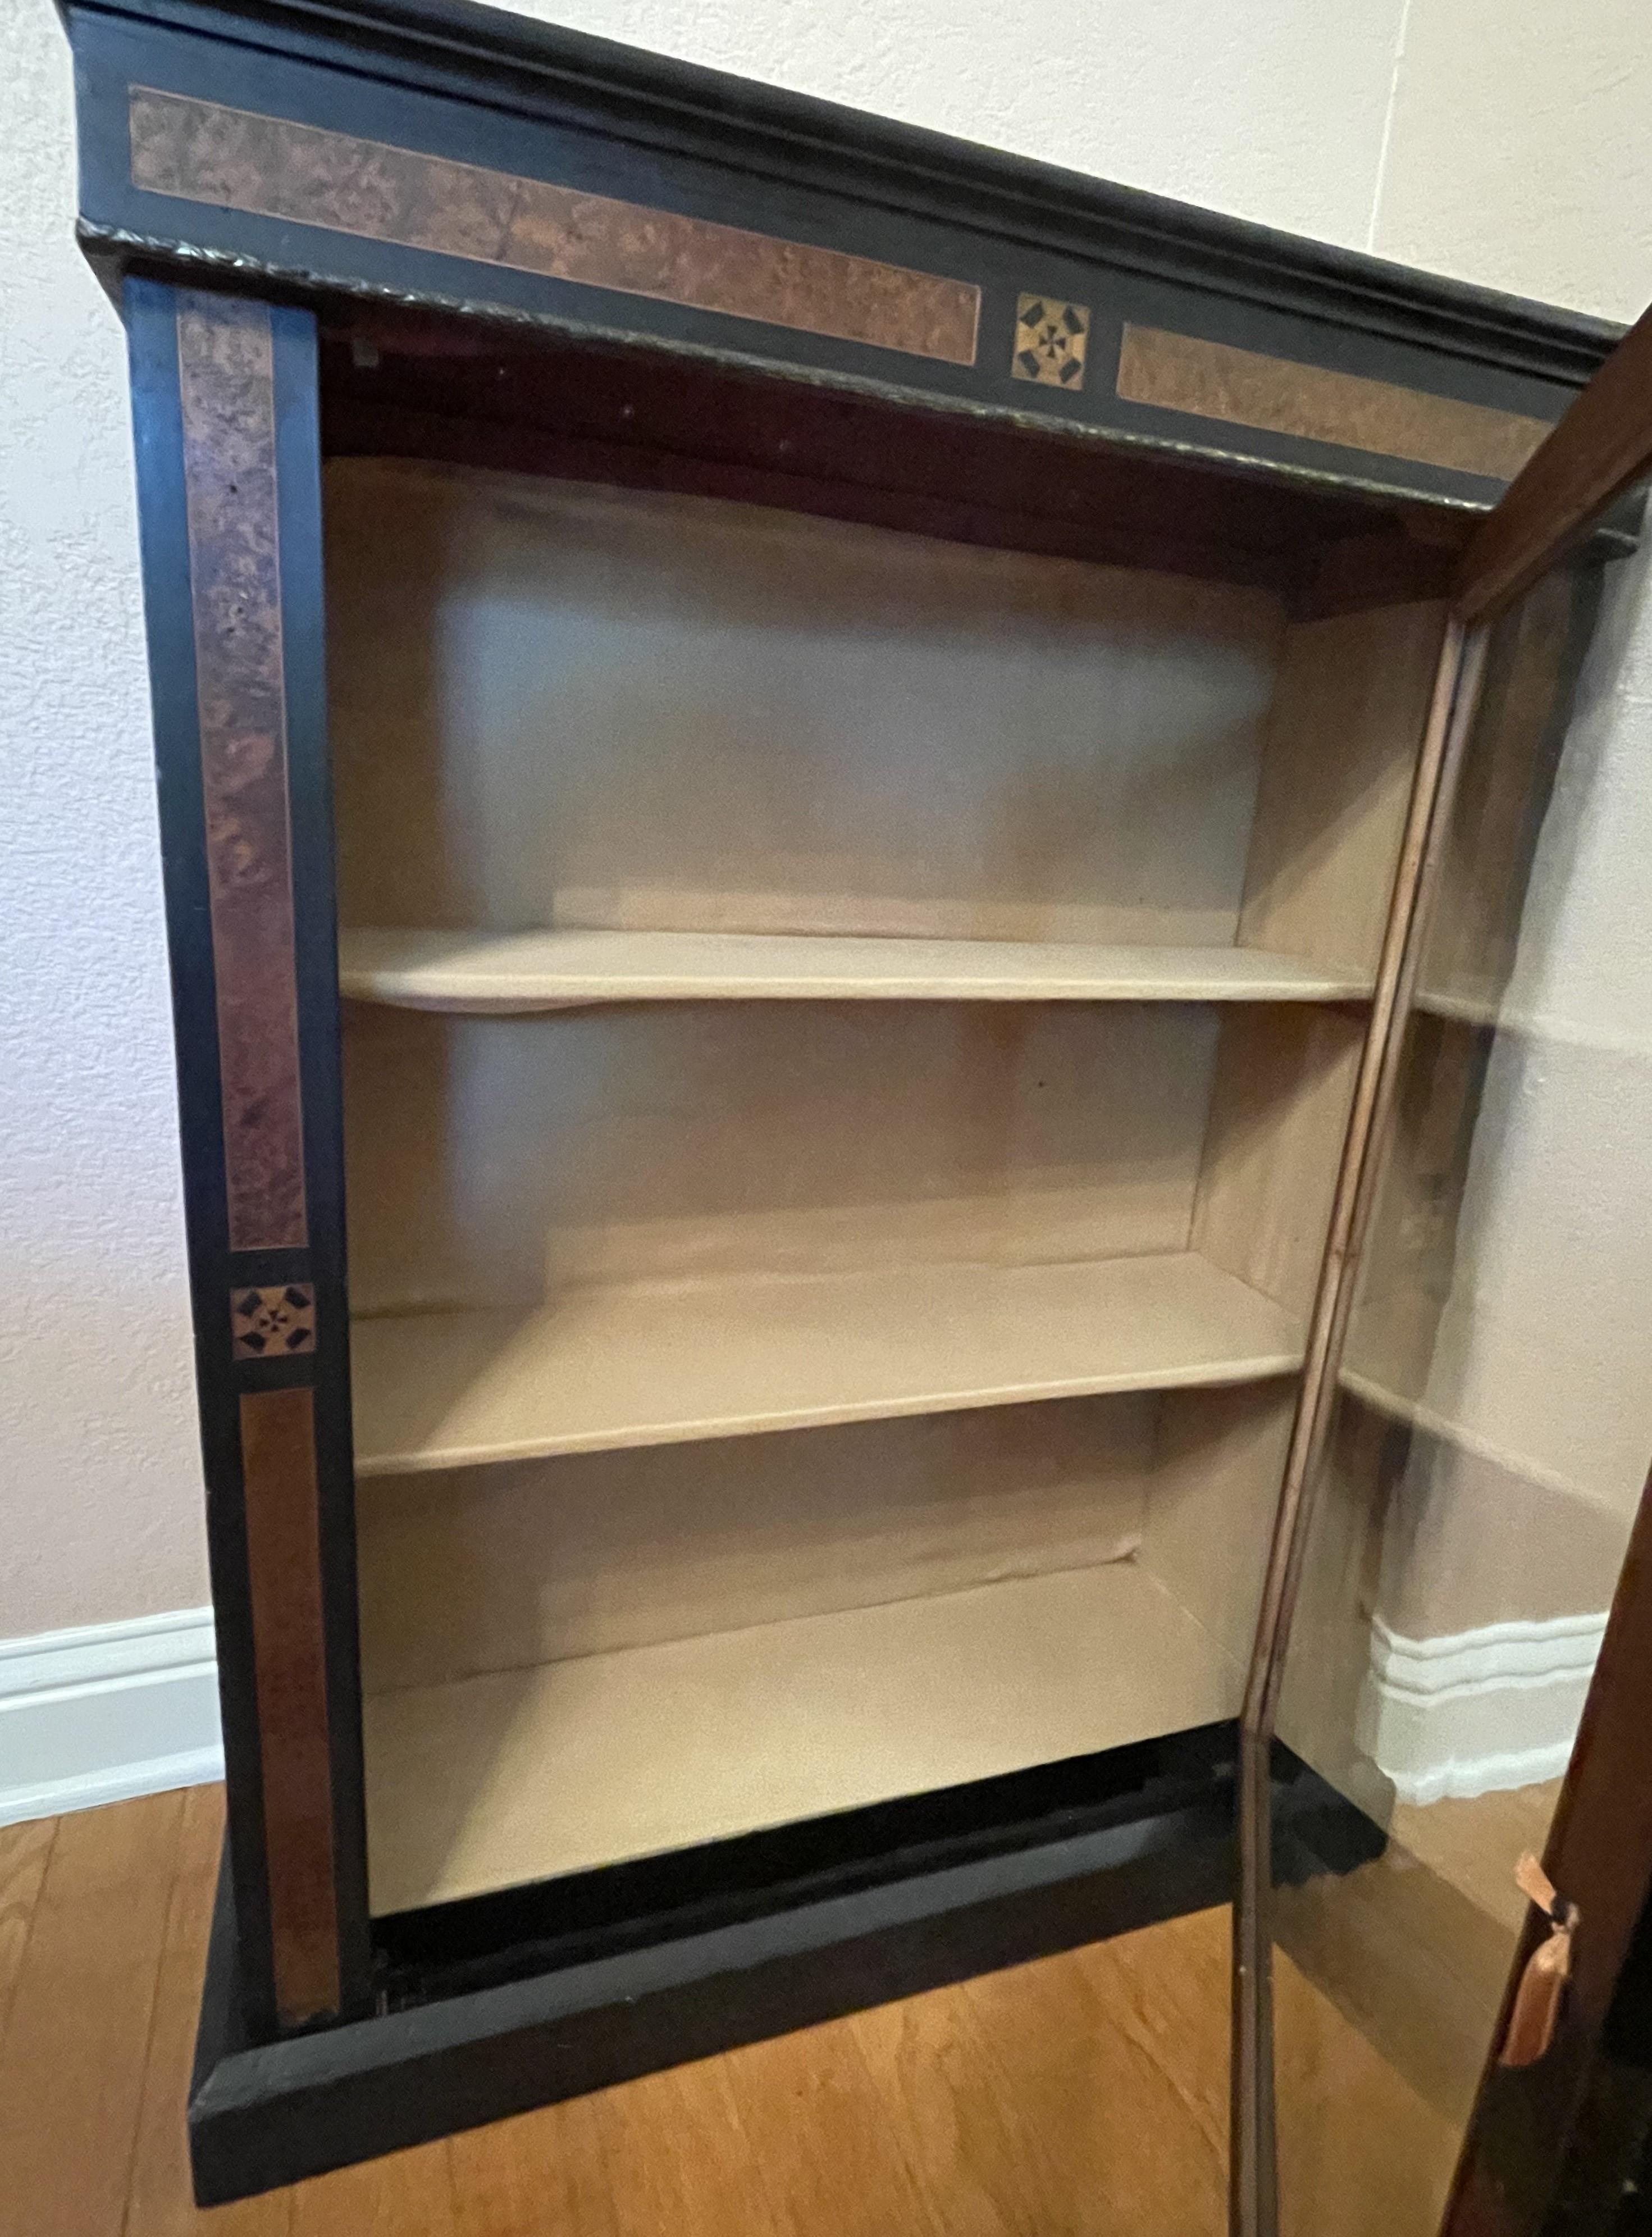 19th Century Cabinet with Glass Door and Iron Key, Rustic Biedermeier In Good Condition For Sale In Austin, TX